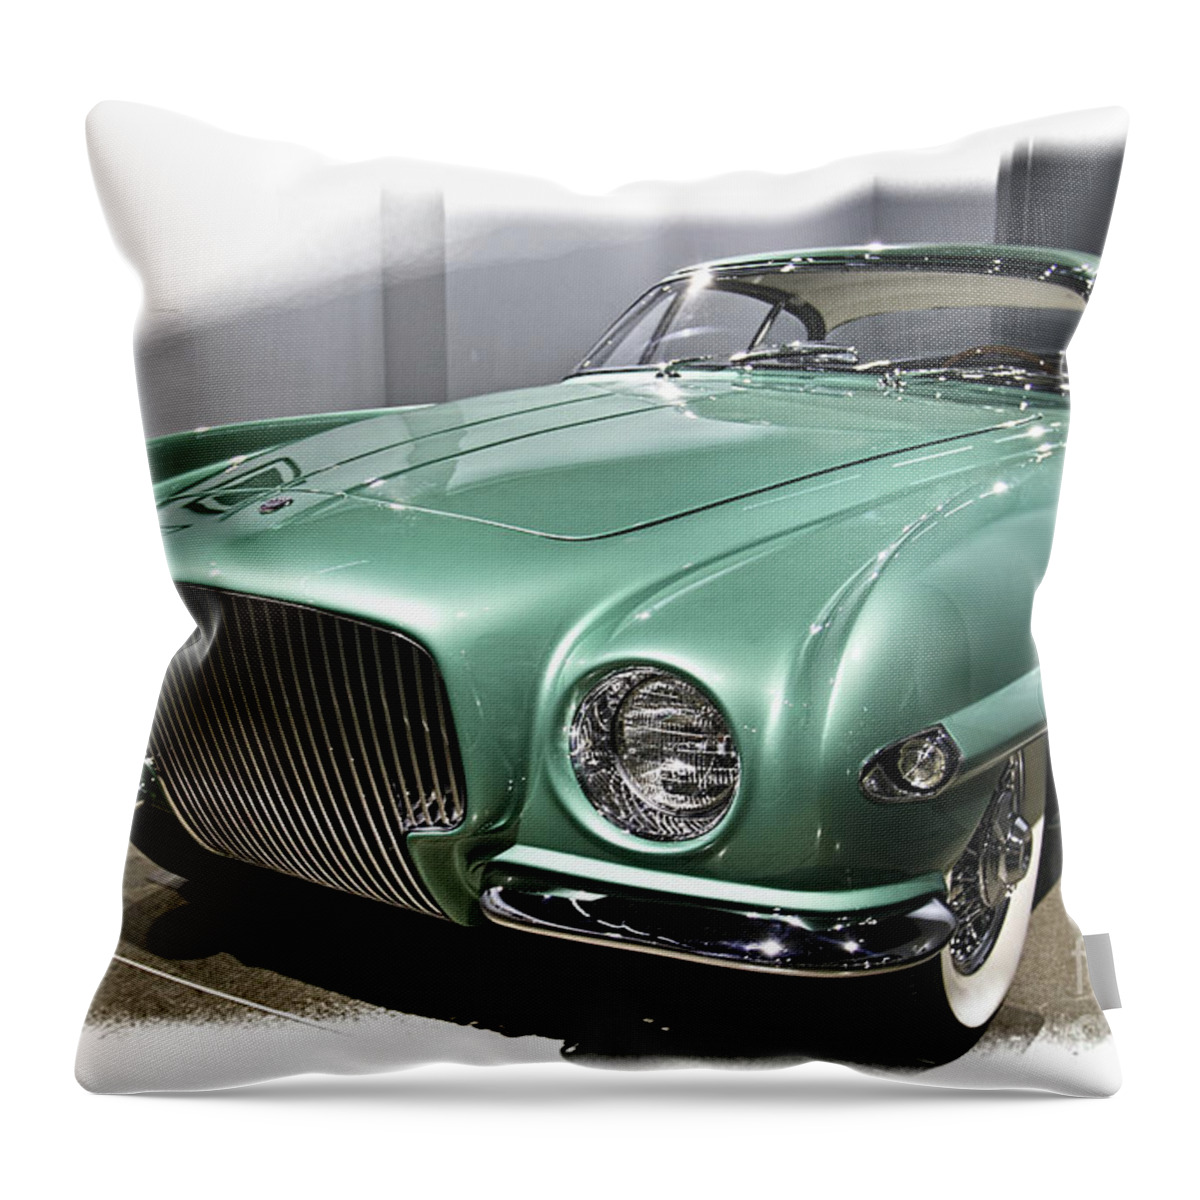 Concept Cars Throw Pillow featuring the photograph Concept Car 2 by Tom Griffithe